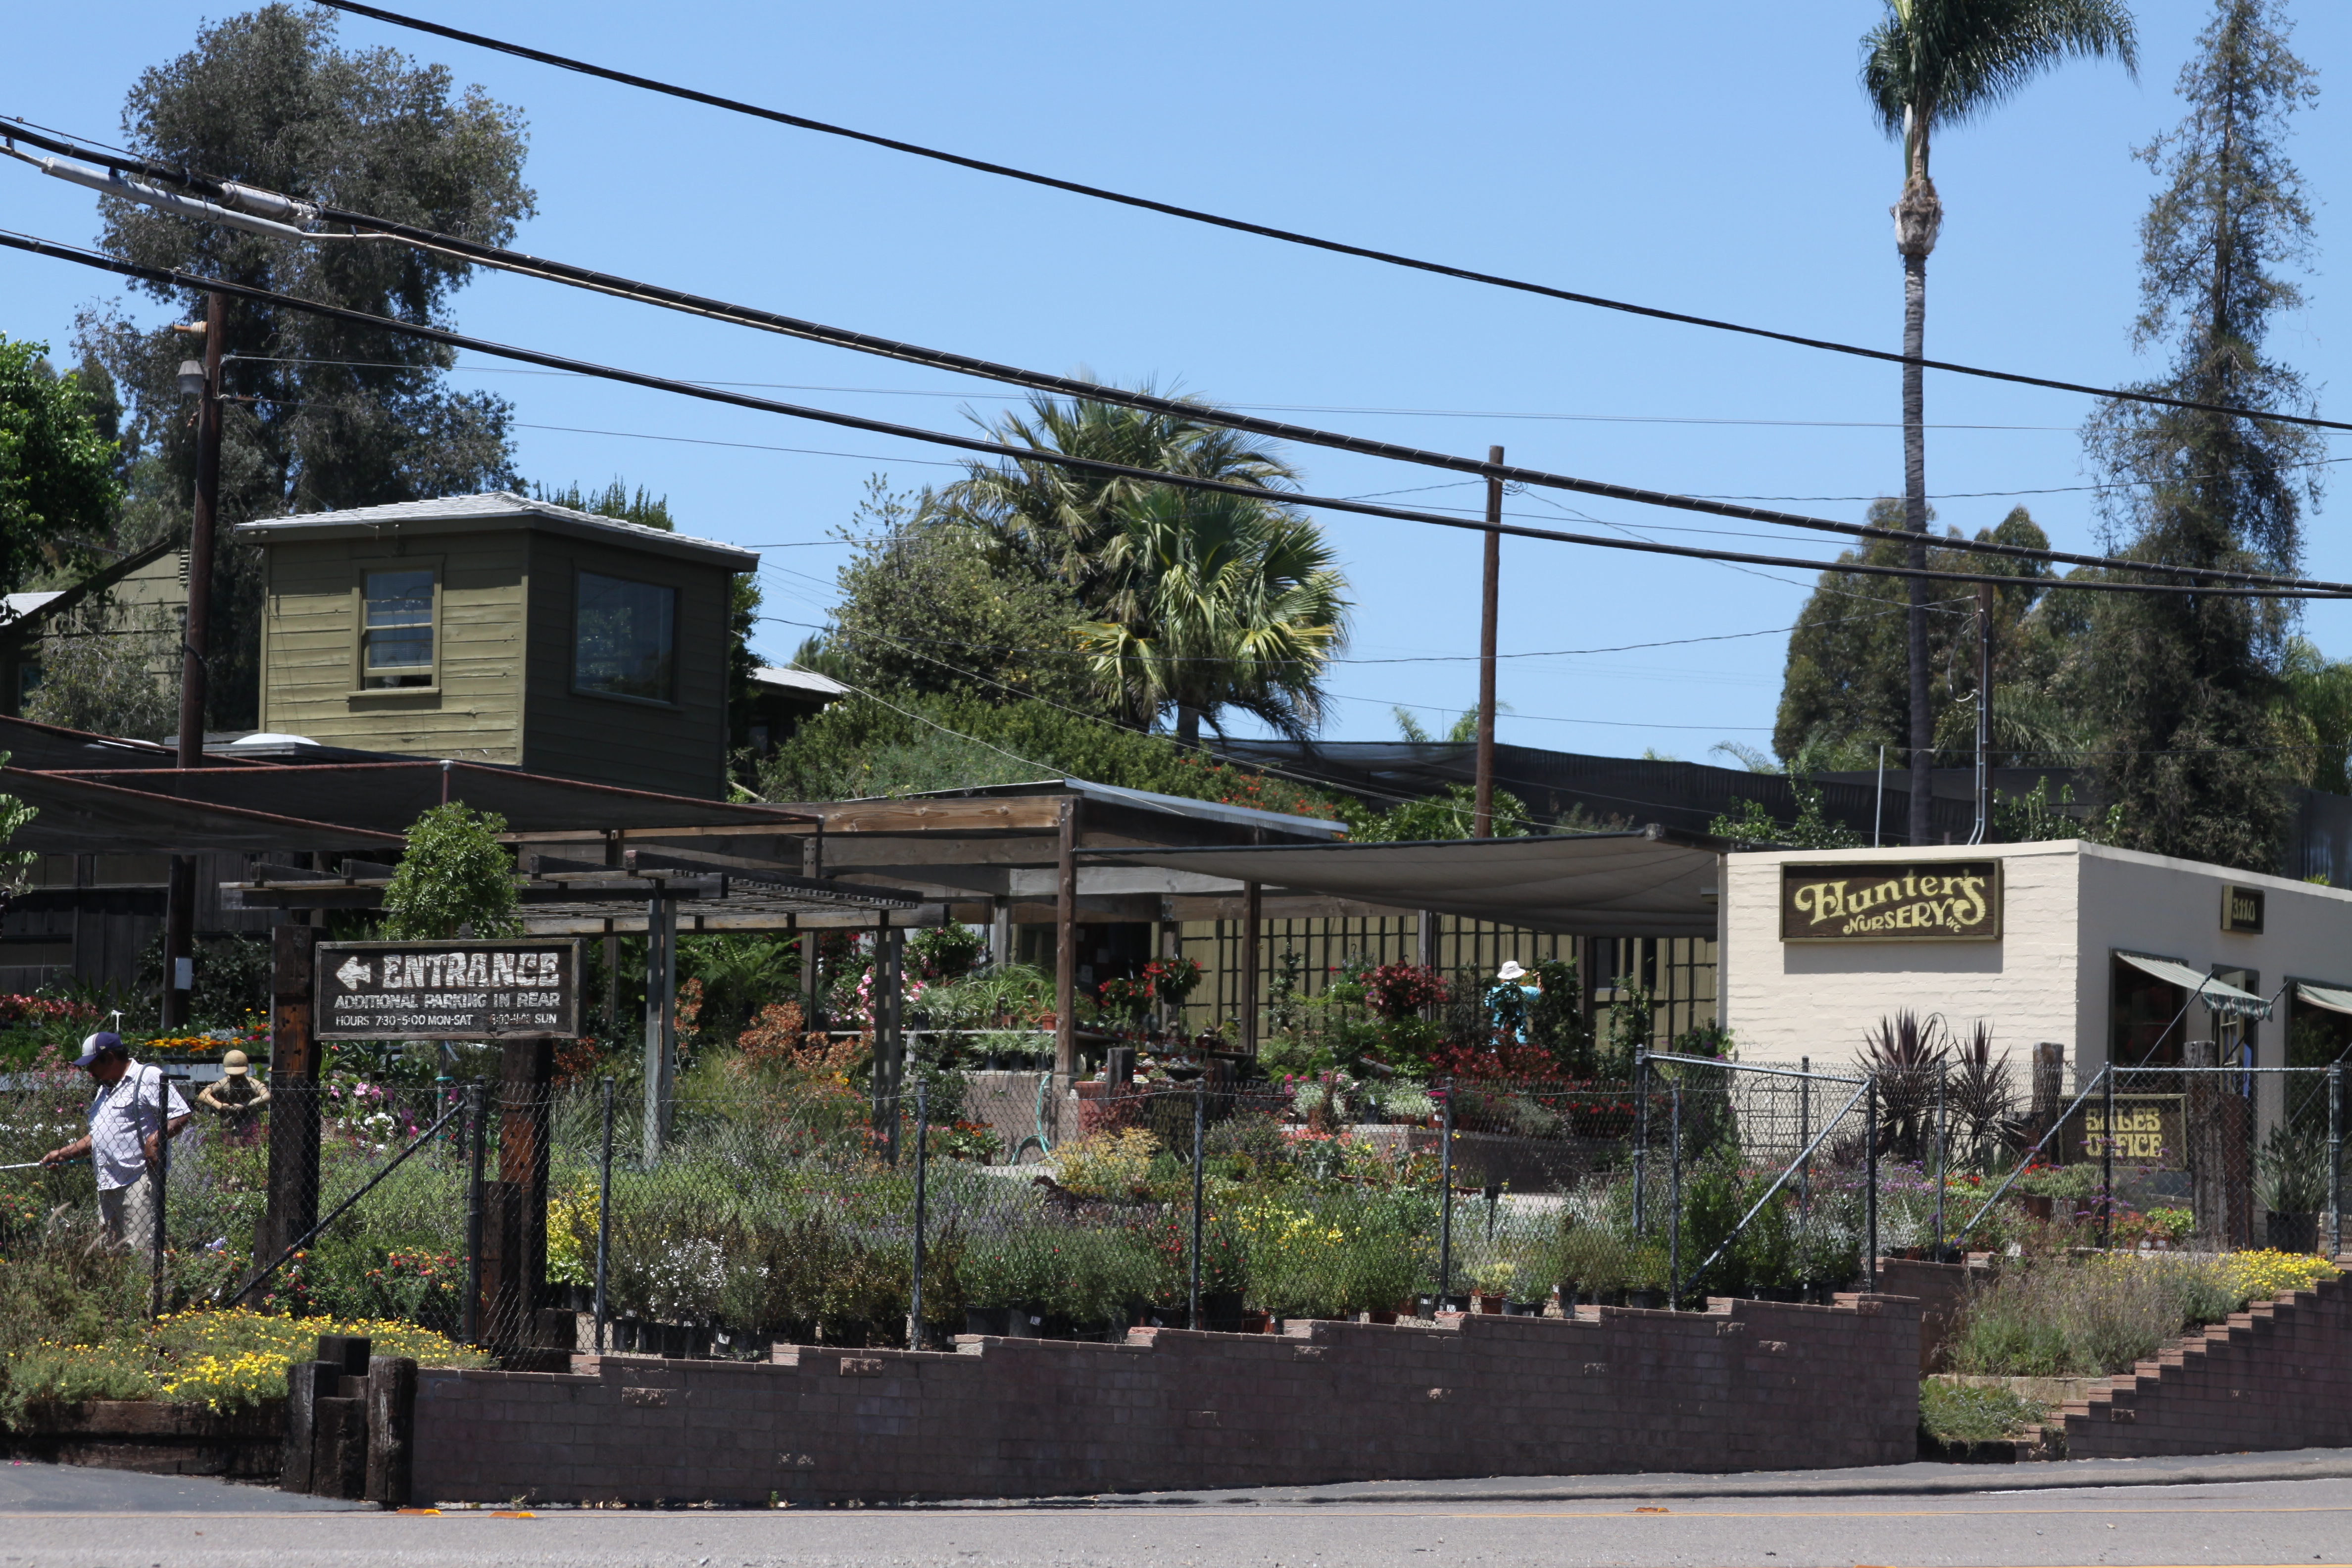 View of Hunter's Nursery San Diego from Sweetwater Road in Lemon Grove, CA